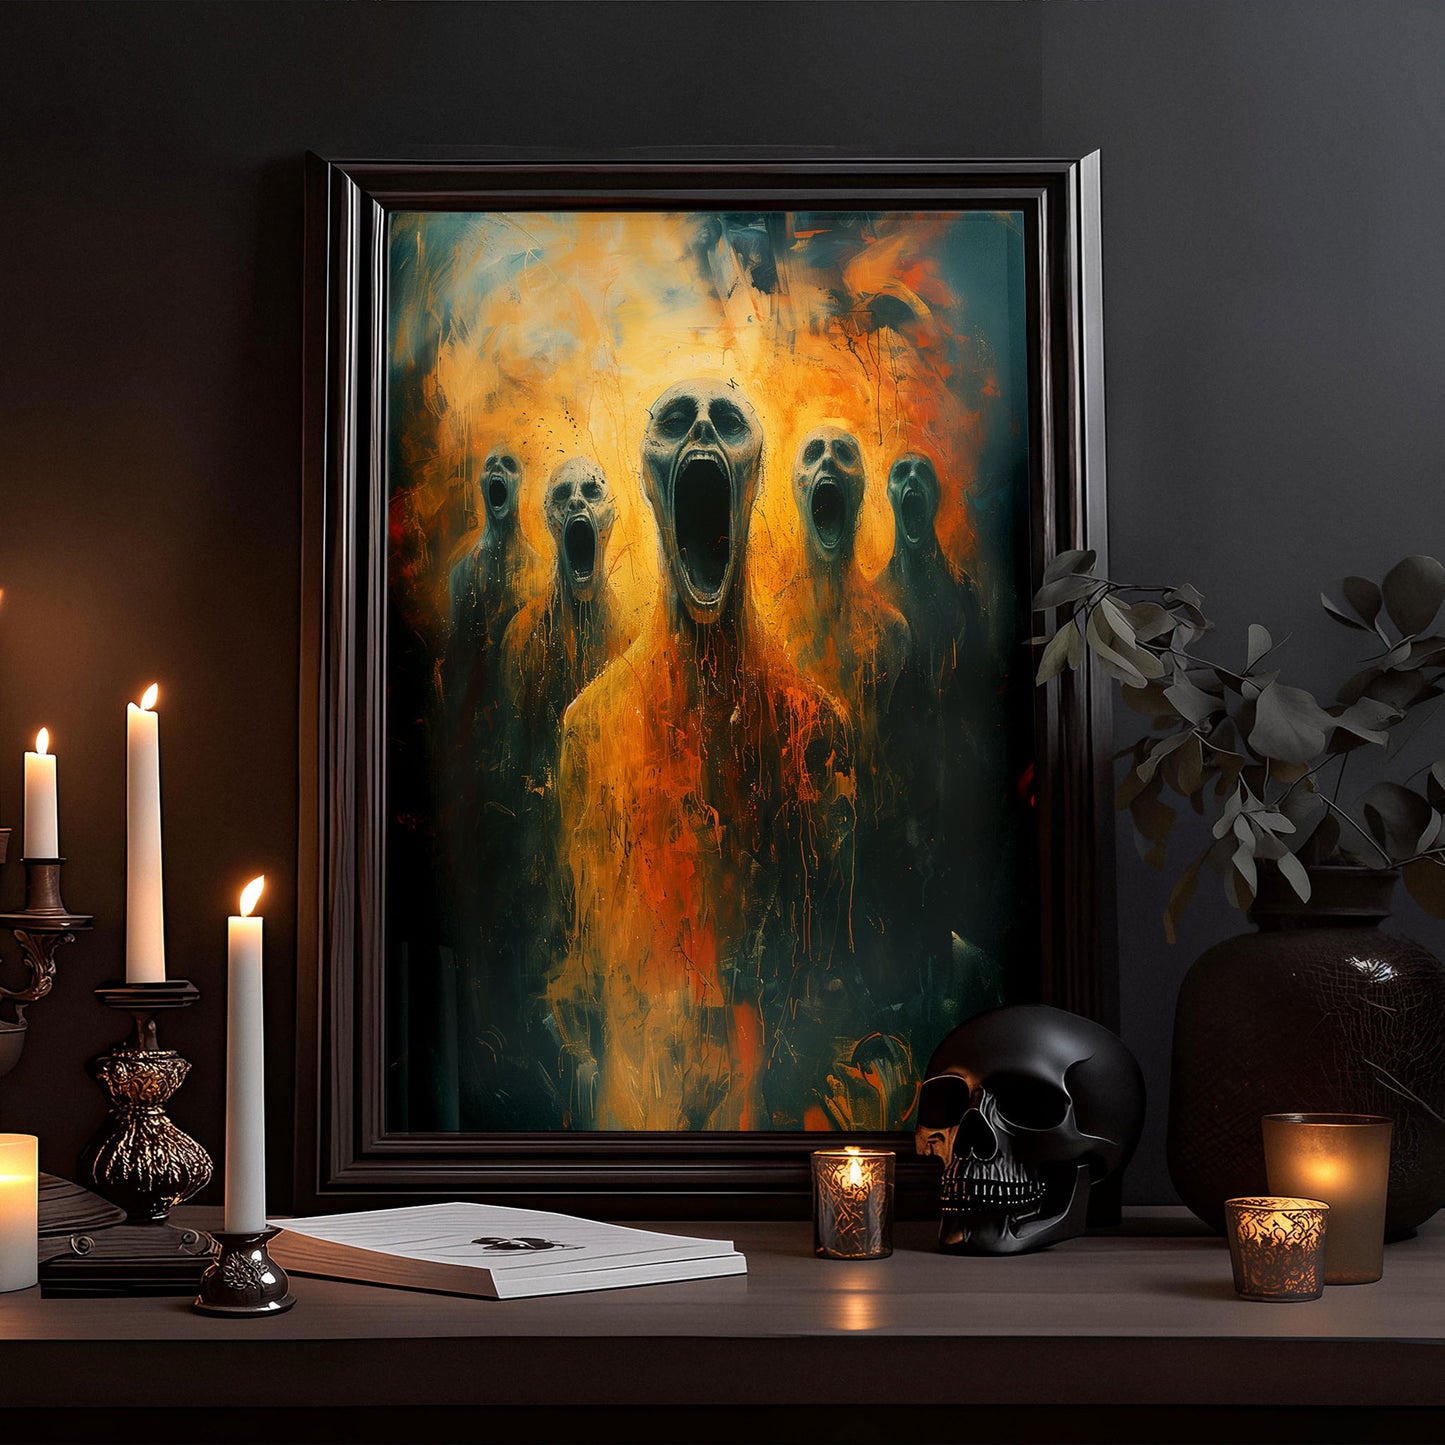 Screams from Hell Poster - Dark Gothic Painting - Horror Art Print